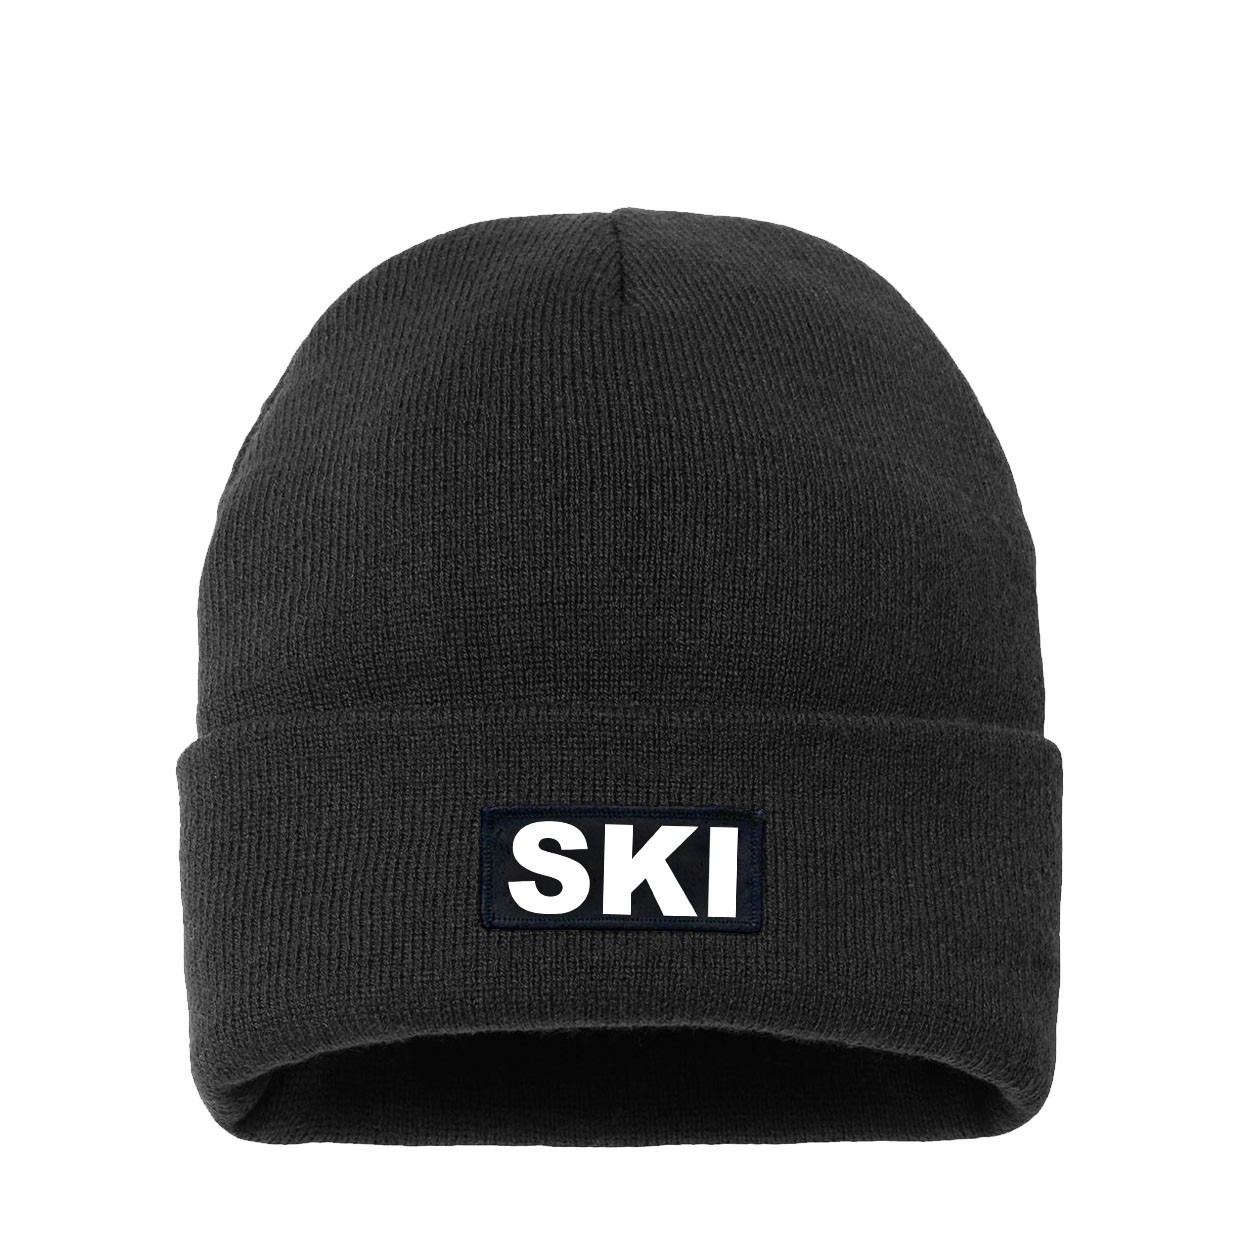 Ski Brand Logo Night Out Woven Patch Night Out Sherpa Lined Cuffed Beanie Black